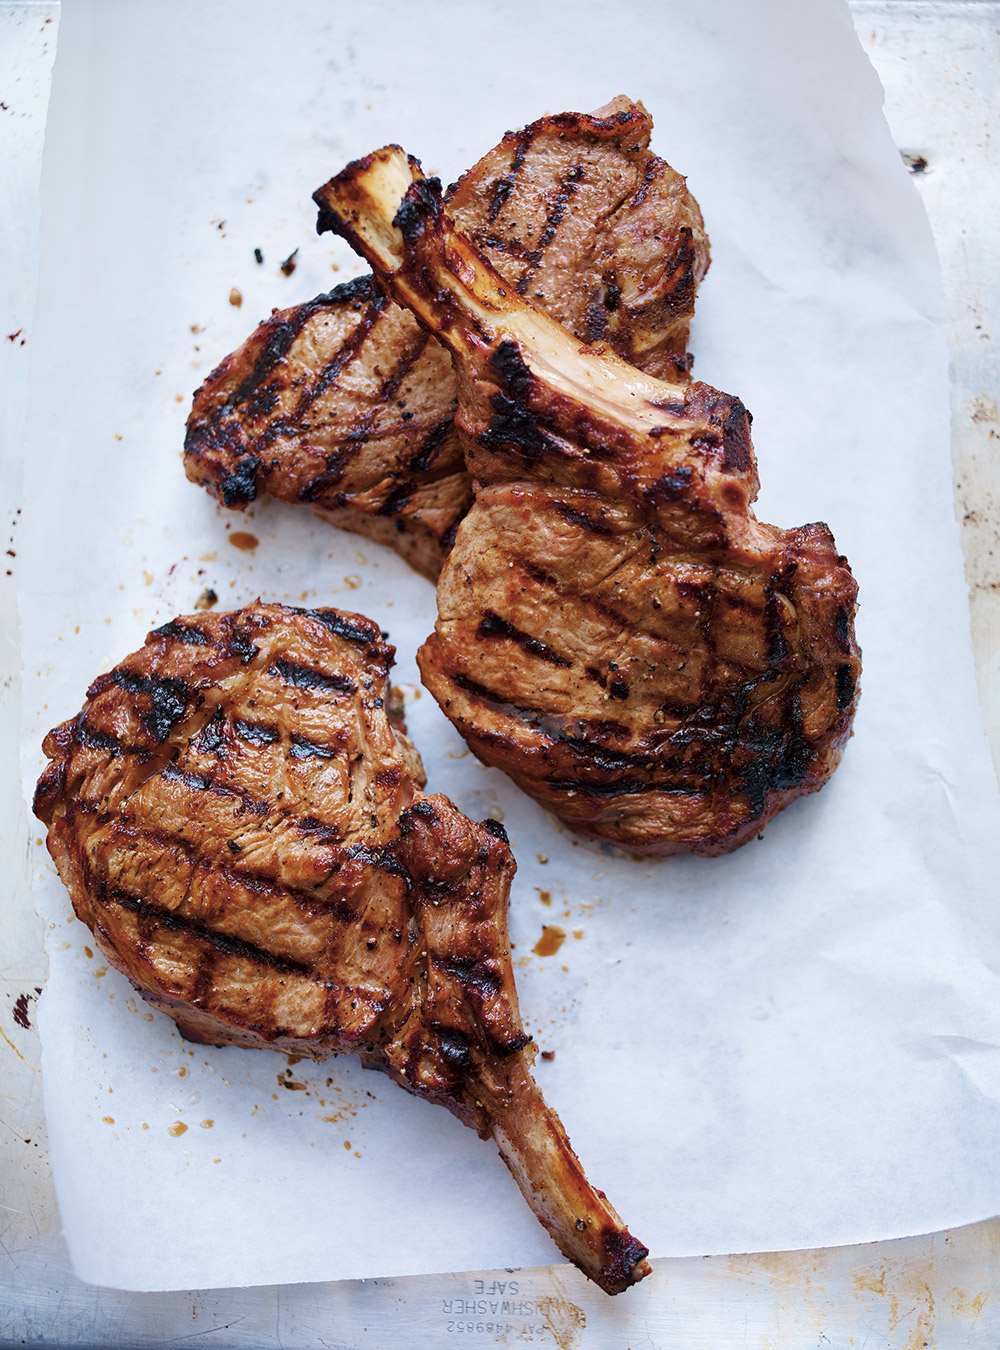 Grilled Veal Chops with Mustard